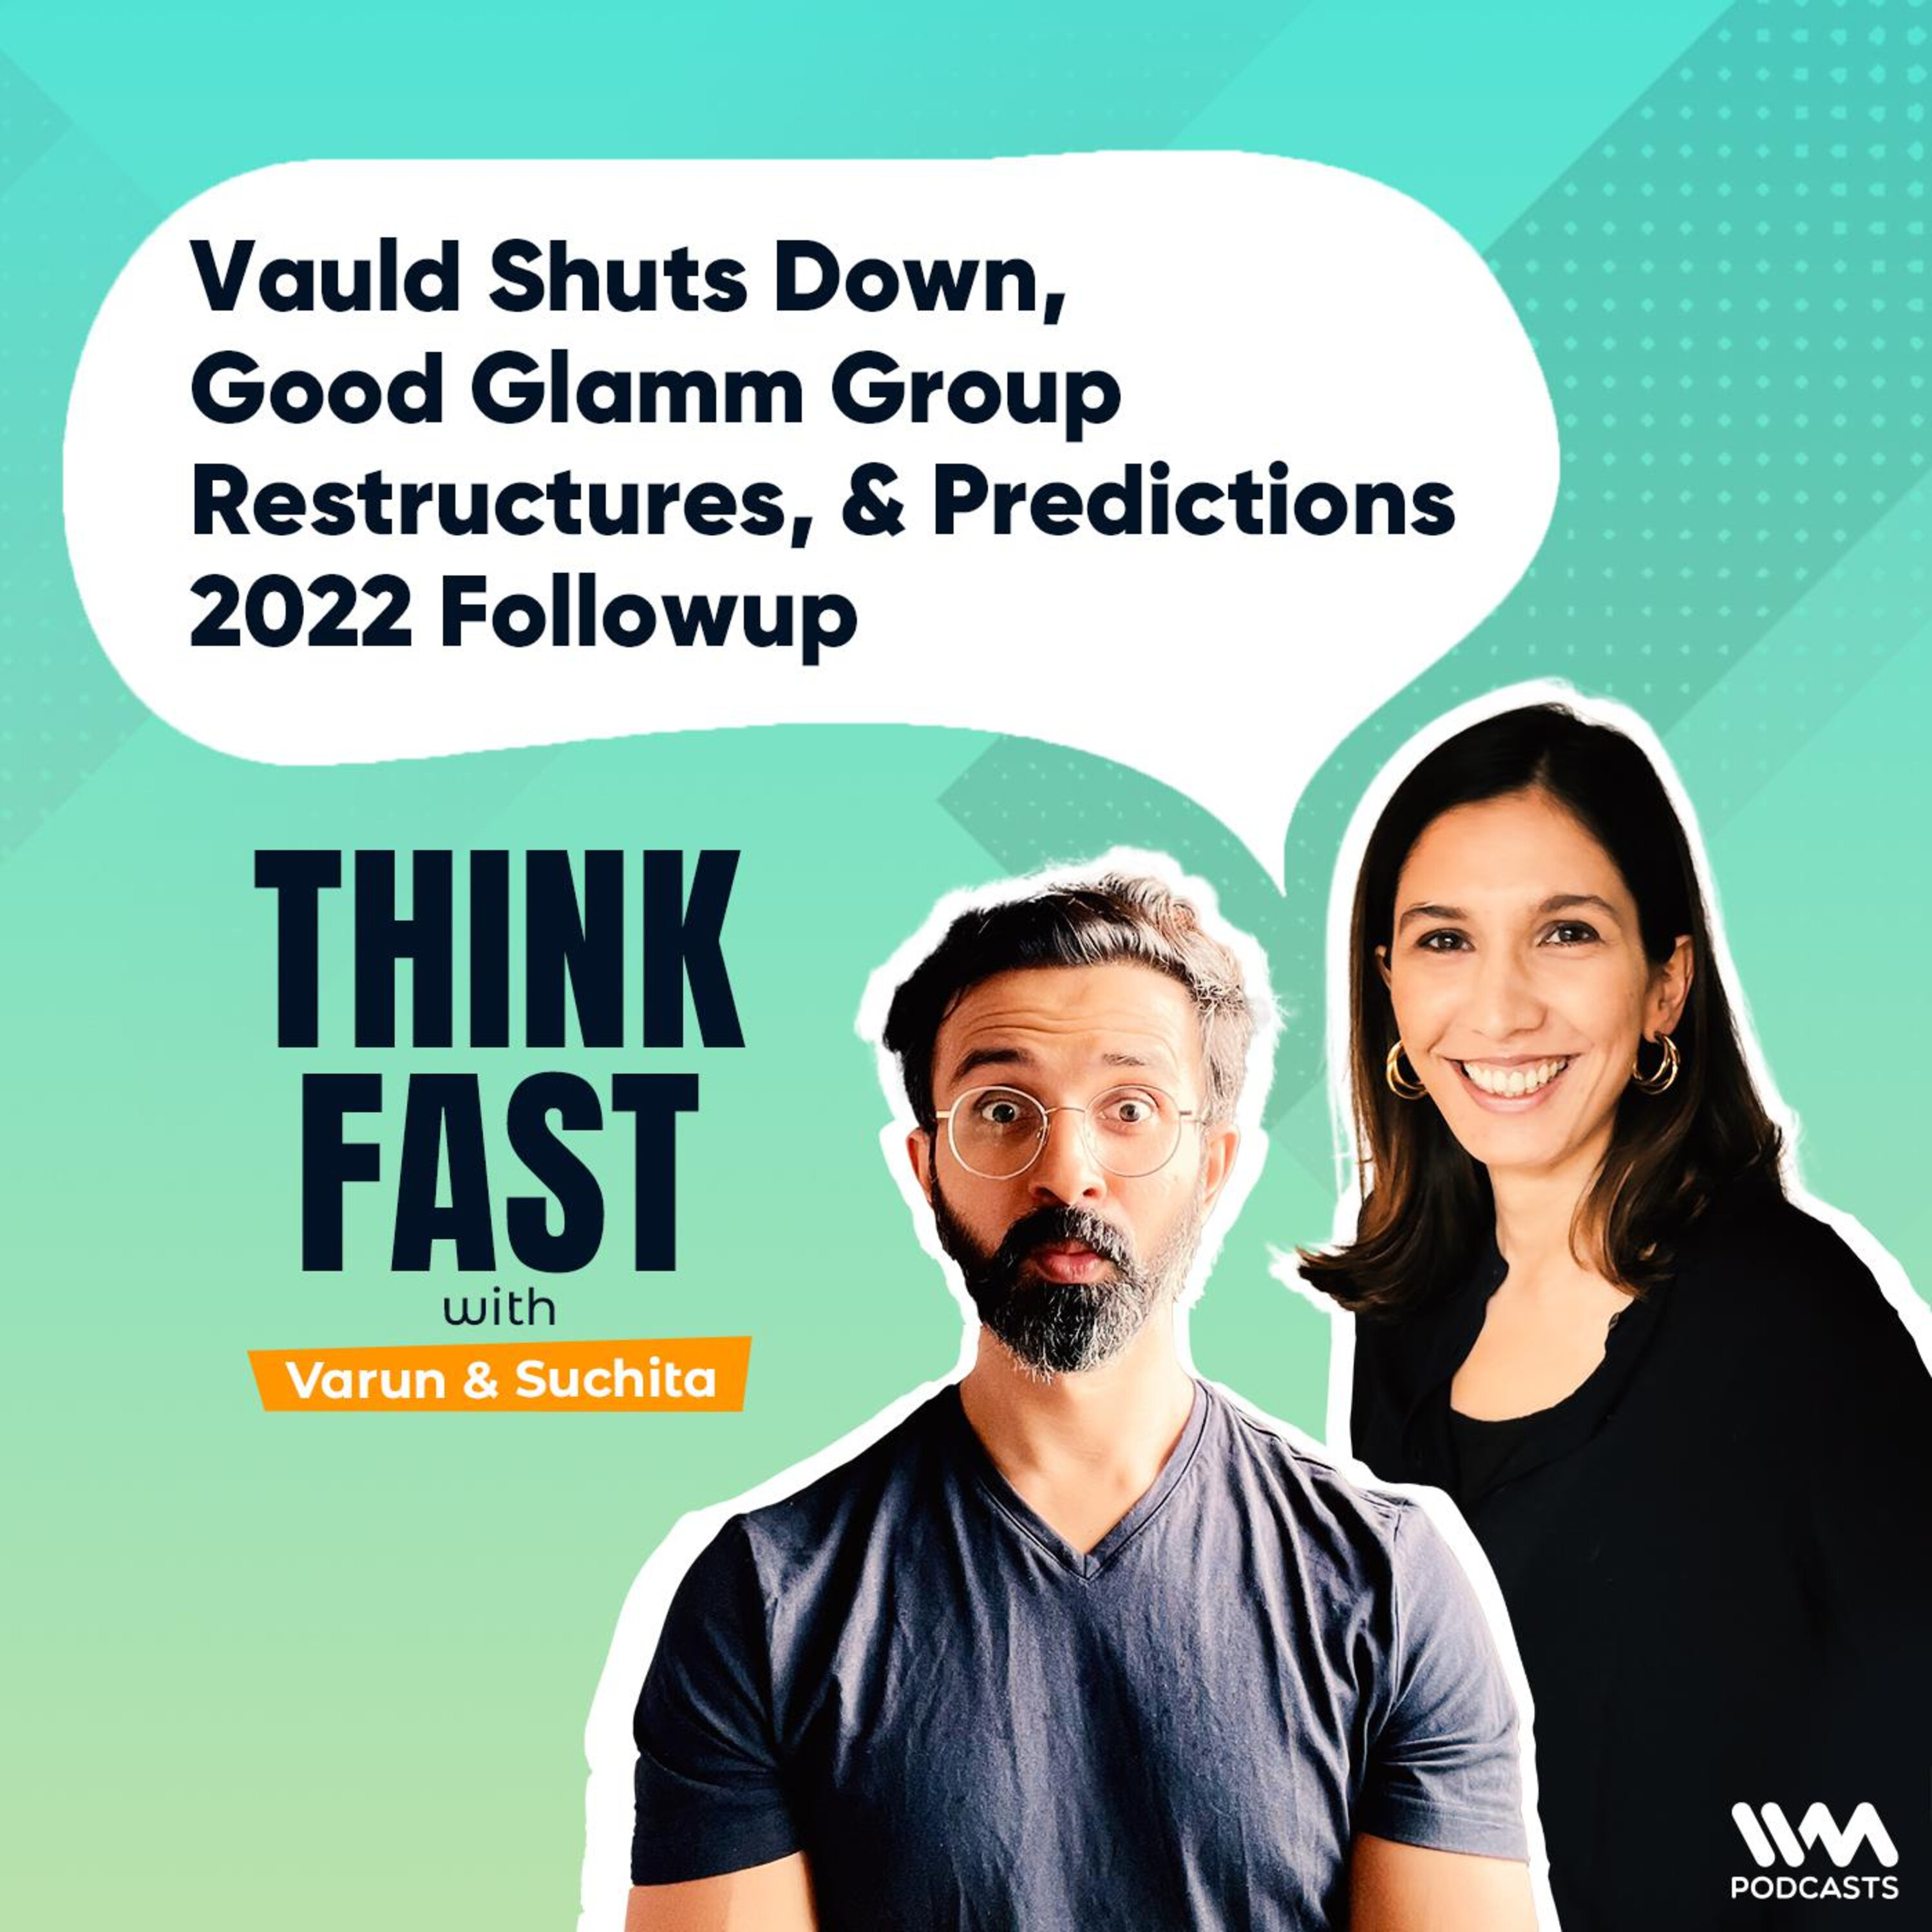 Vauld Shuts Down, Good Glamm Group Restructures, & Predictions 2022 Followup